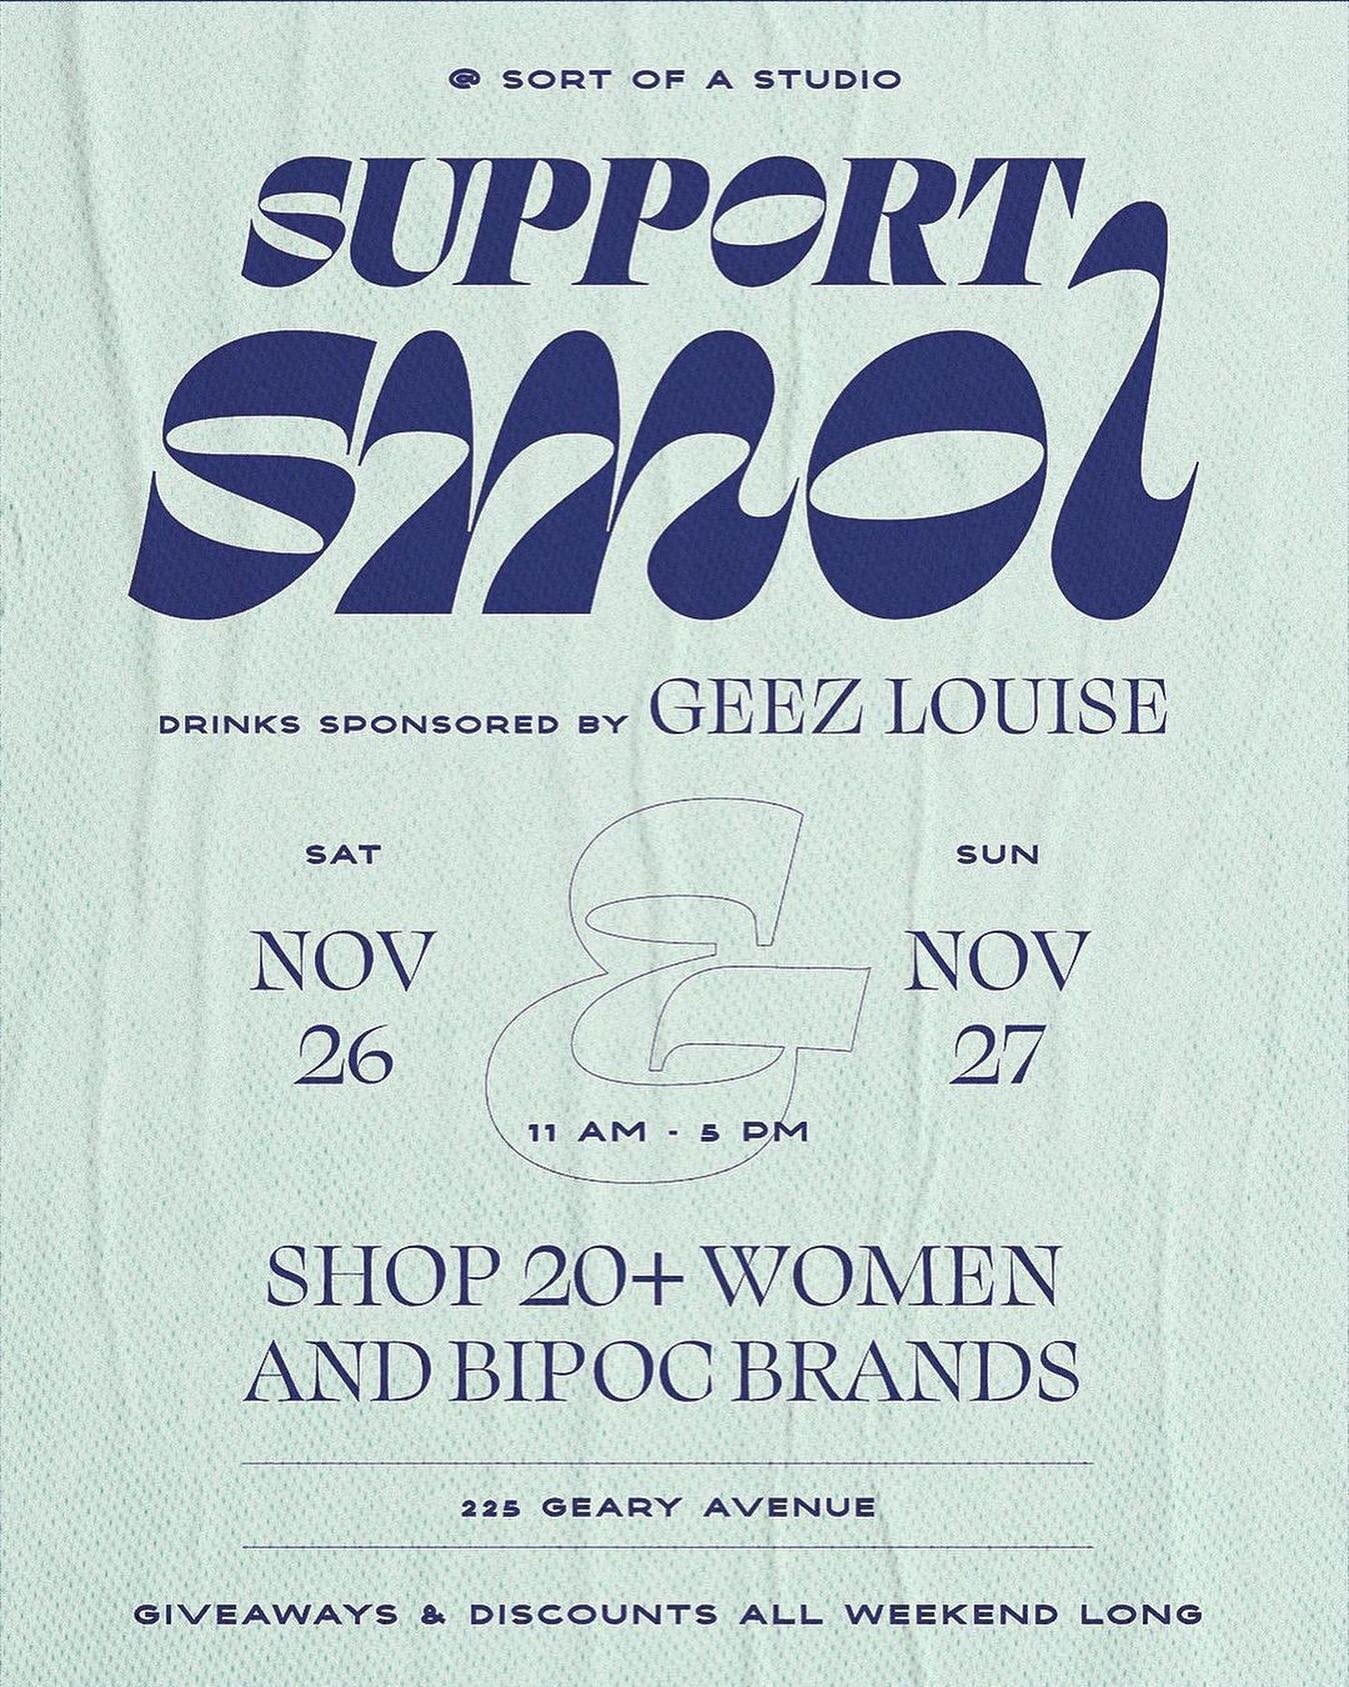 You&rsquo;re all invited! 💌 This Black Friday/Cyber Monday weekend, the @raaniandross team is encouraging folks in Toronto to shop women and BIPOC businesses through their weekend long small business pop-up, Support Smol. 

They&rsquo;ve thoughtfull